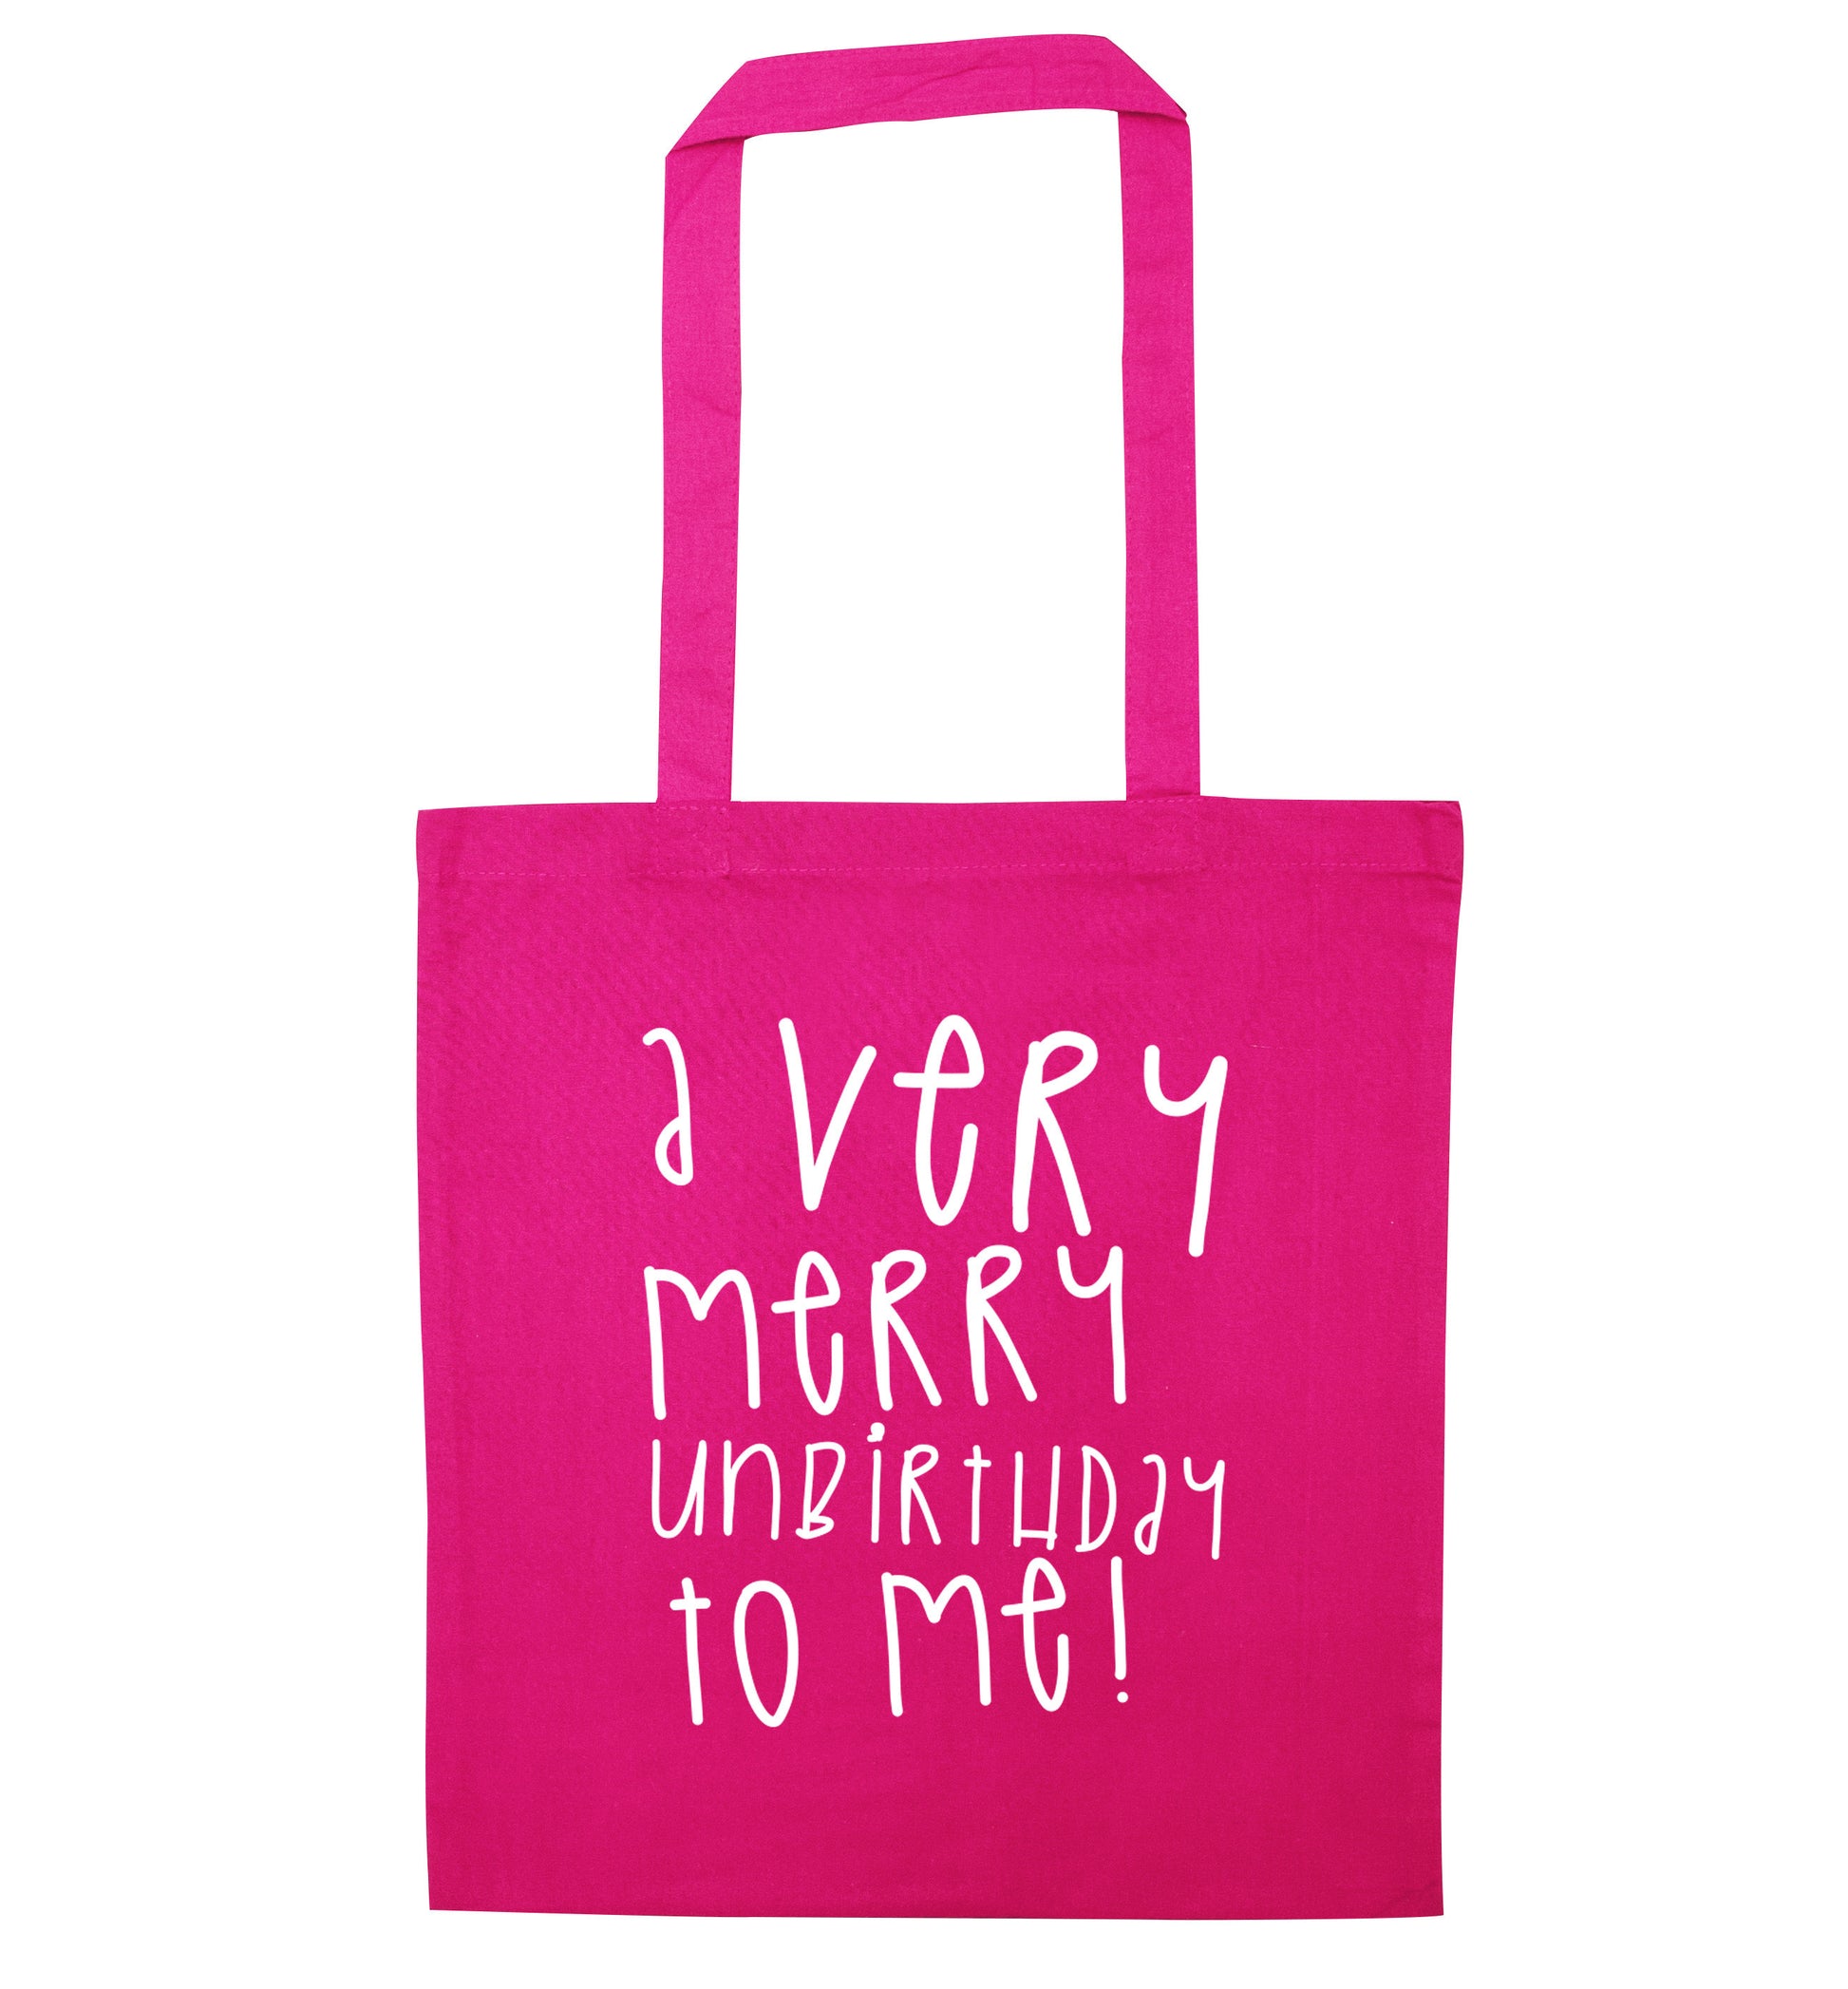 A very merry unbirthday to me! pink tote bag